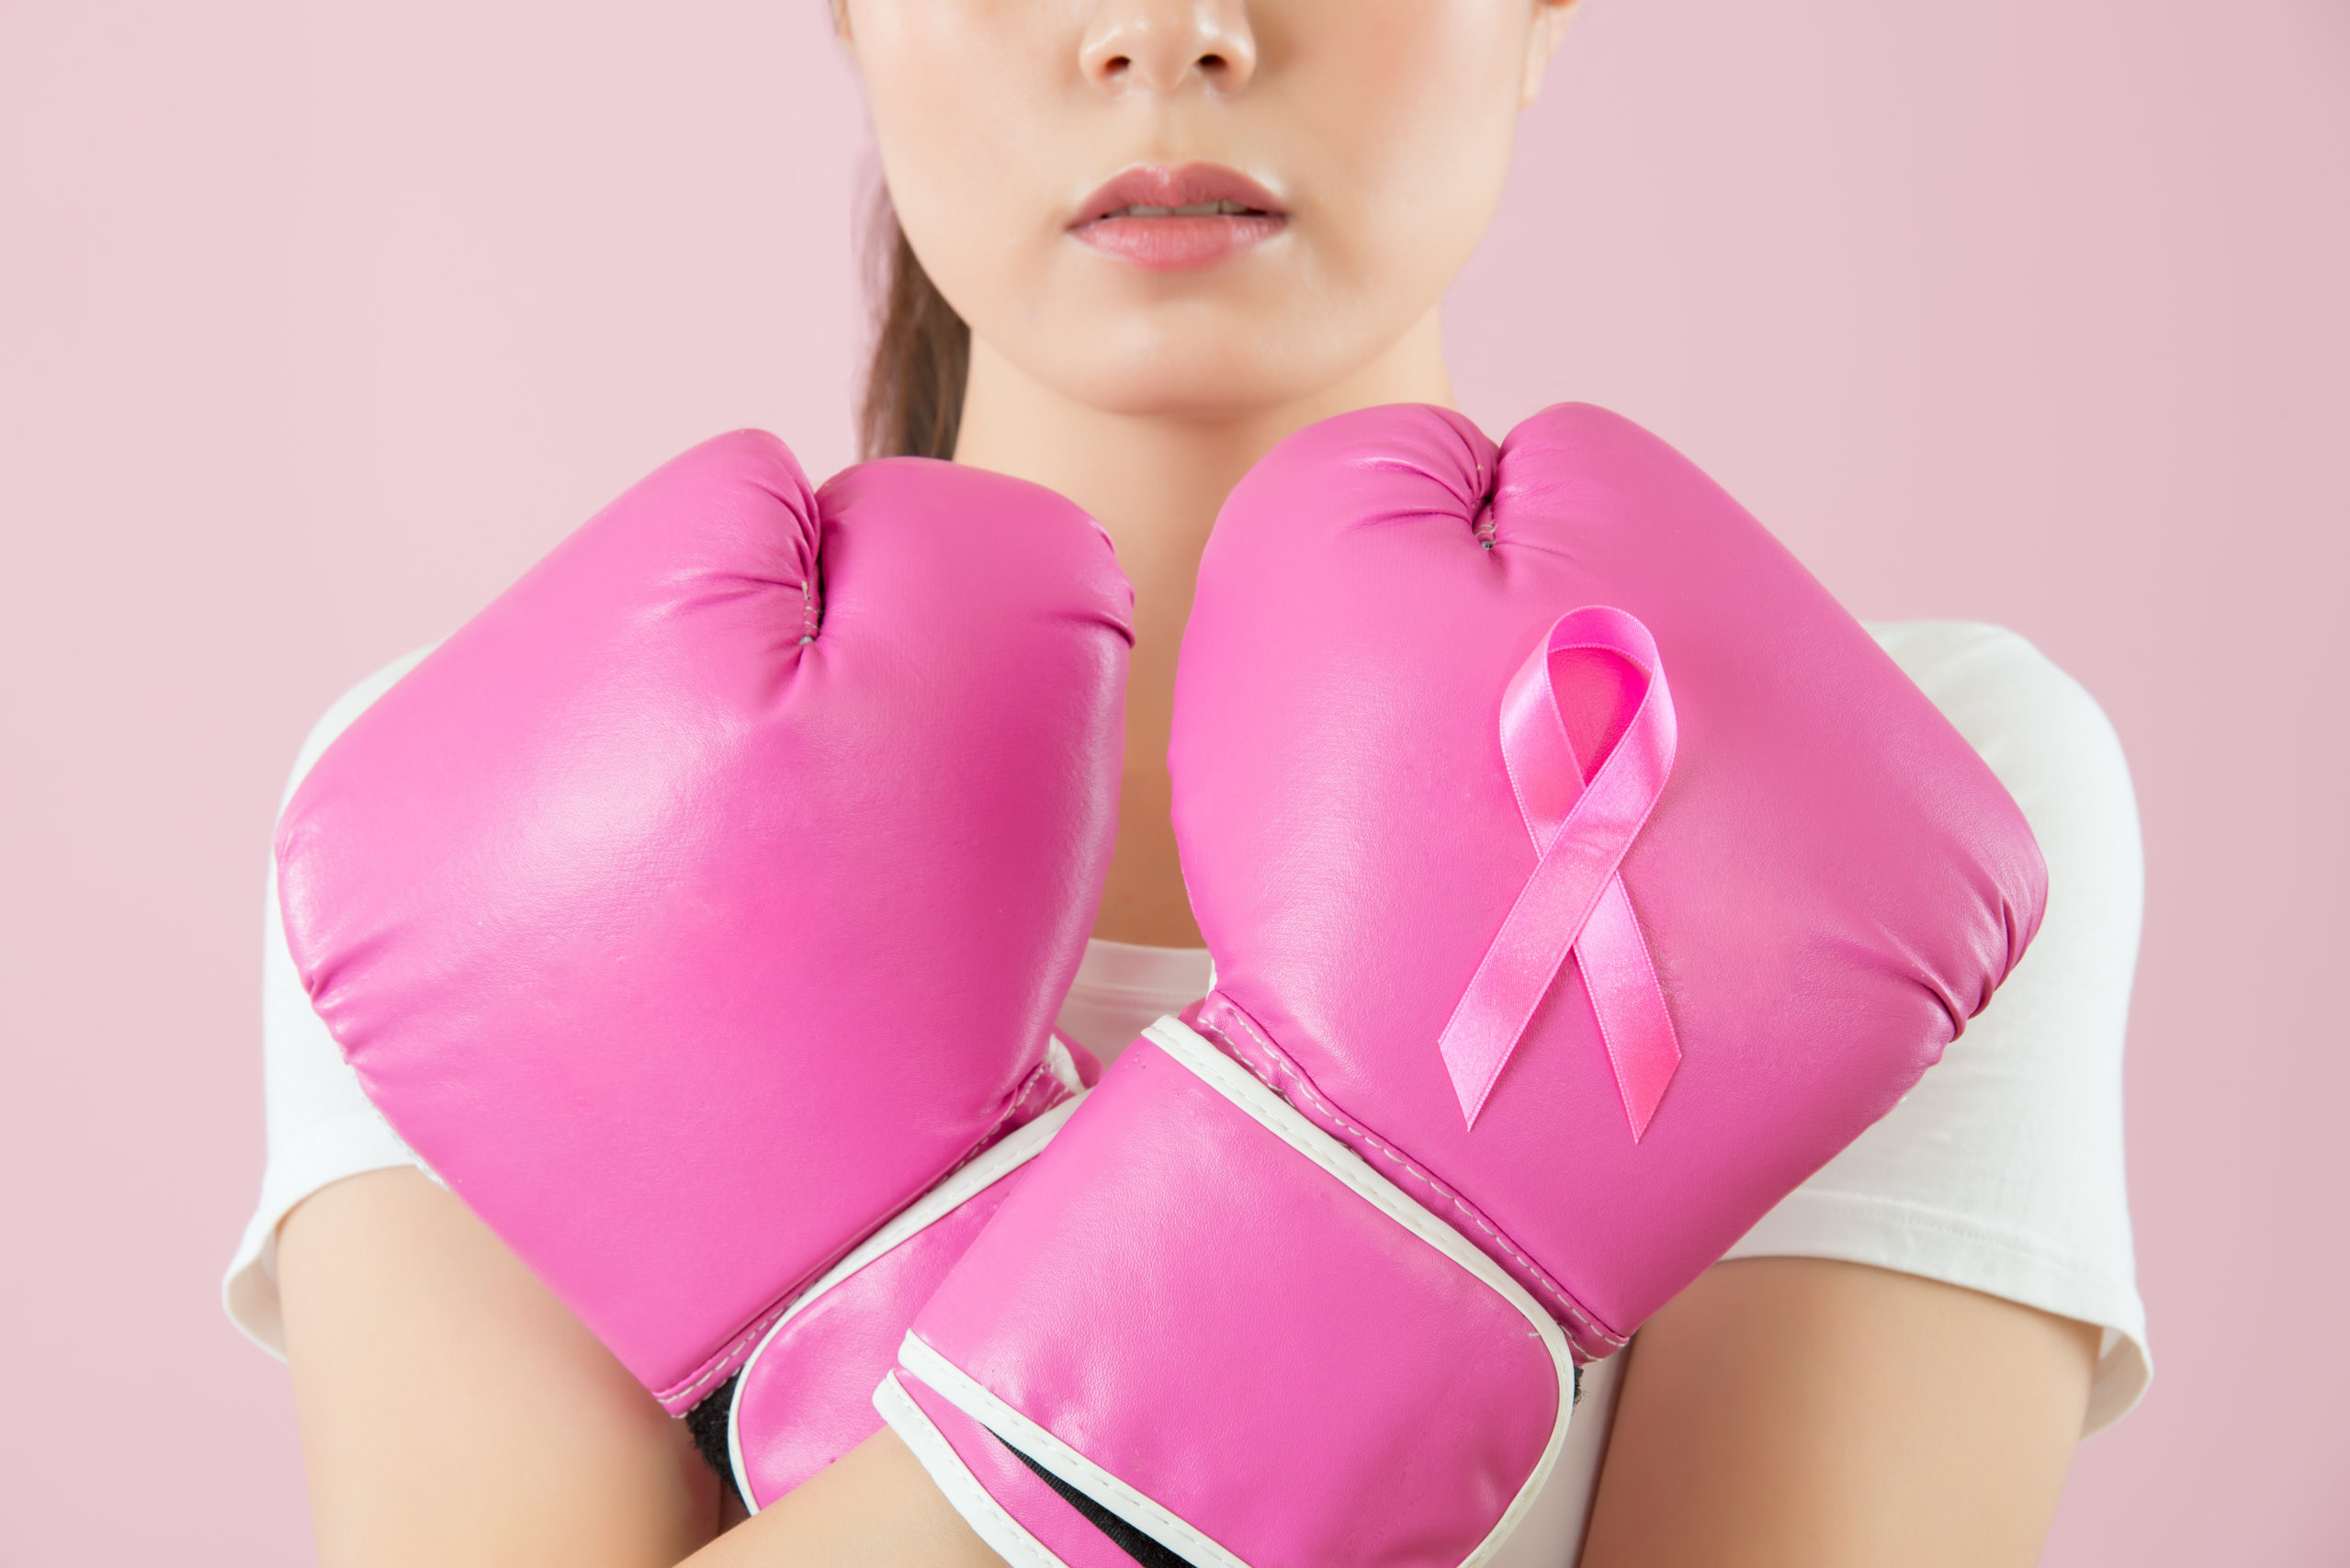 Life Insurance After Breast Cancer